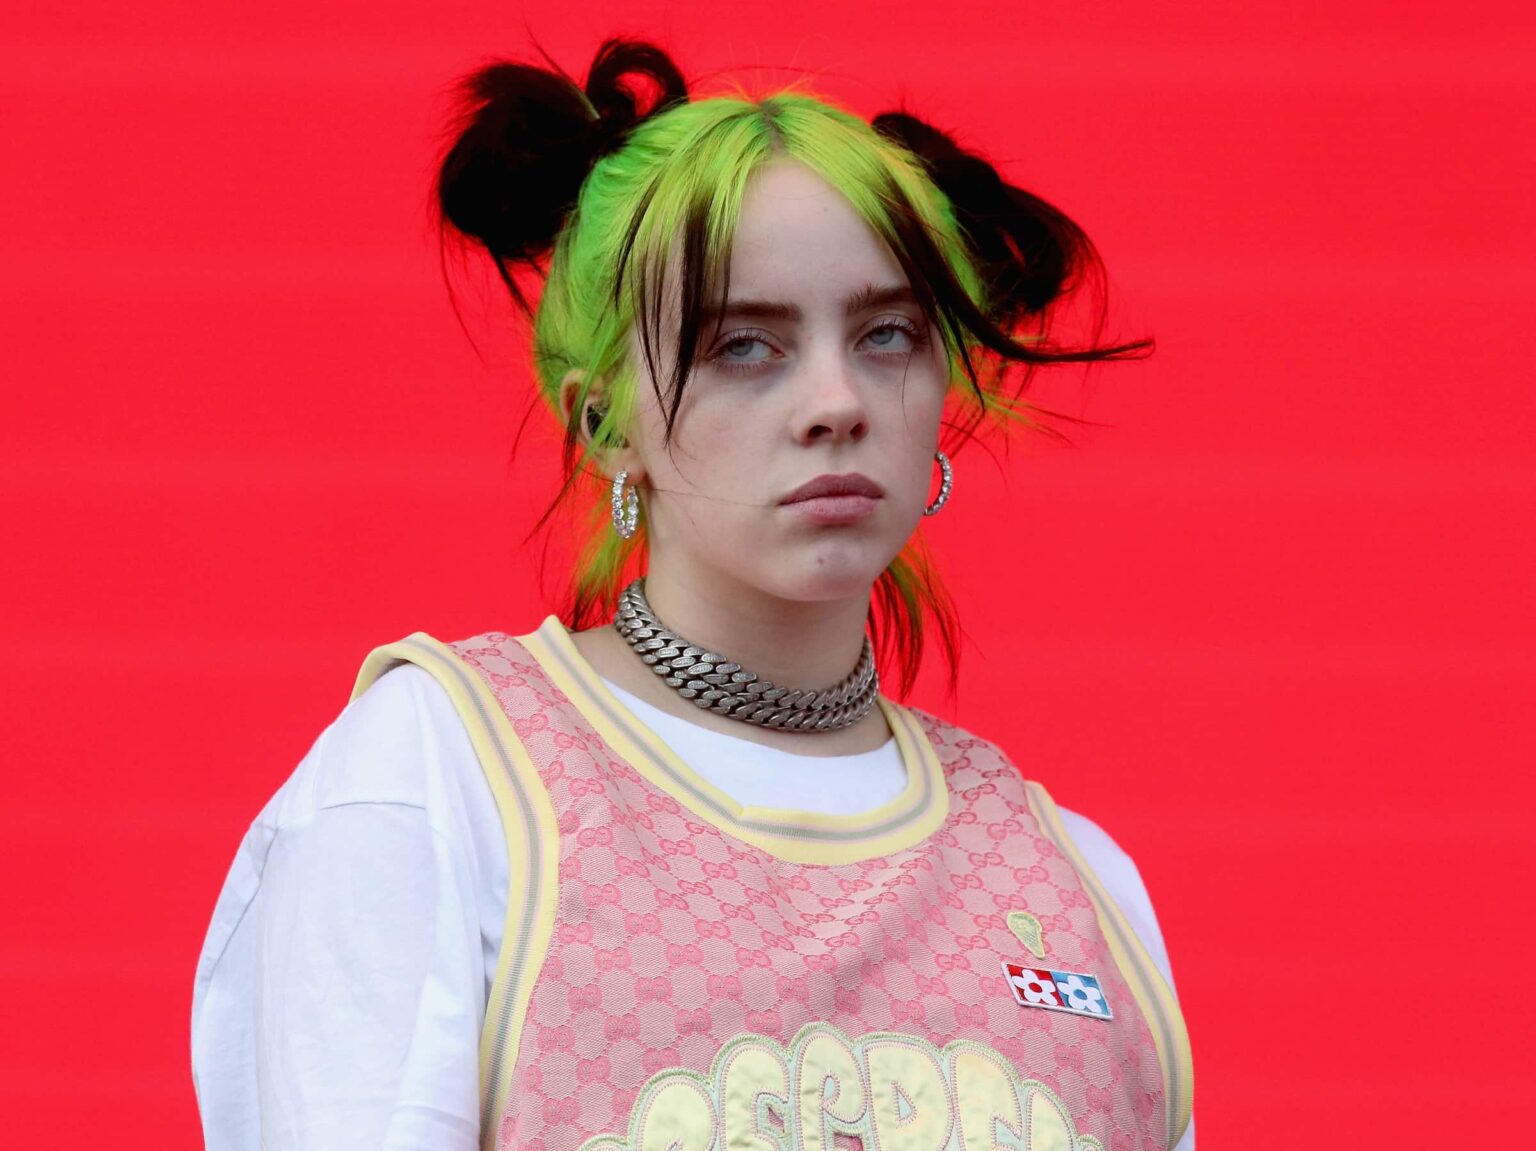 Uh-oh. A new picture might have gotten Billie Eilish in trouble. Is the popular singer dating a racist homophobe? Dive into the sea of speculation!